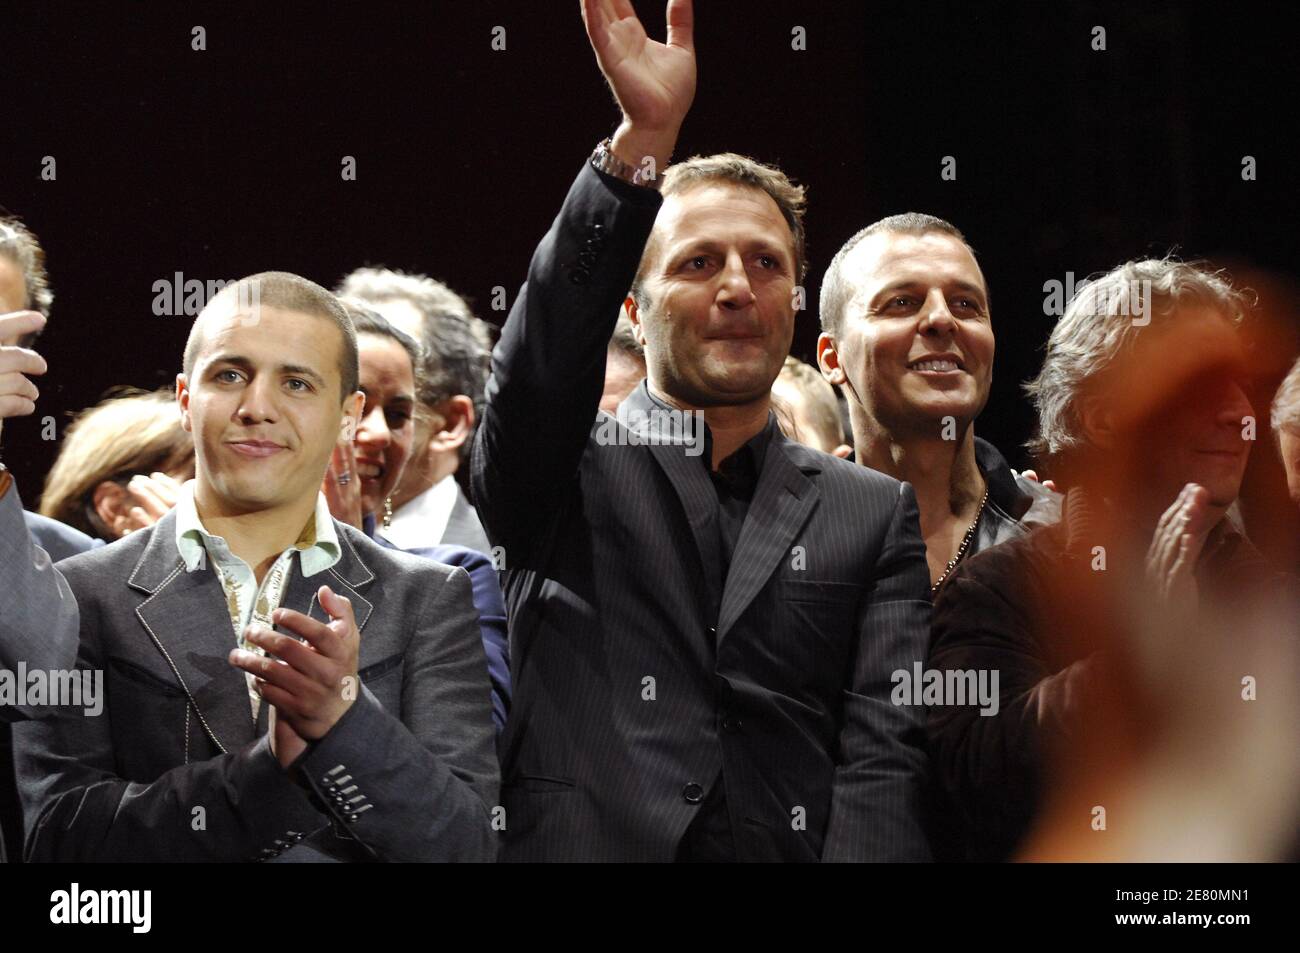 Singer Faudel and TV presenter Arthur pictured on stage waving Nicolas Sarkozy's supporters, Place de la Concorde in Paris, France, May 6, 2007. French voters elected reform-minded Nicolas Sarkozy as their new president on Sunday, giving him a comfortable winning margin, preliminary official results and projections from four polling agencies showed. With more than half of the vote counted, Sarkozy was scoring just over 53 percent to a little more than 46 percent for Socialist Segolene Royal. Polling agencies also had the conservative Sarkozy winning 53 percent of the vote compared to 47 for Ro Stock Photo